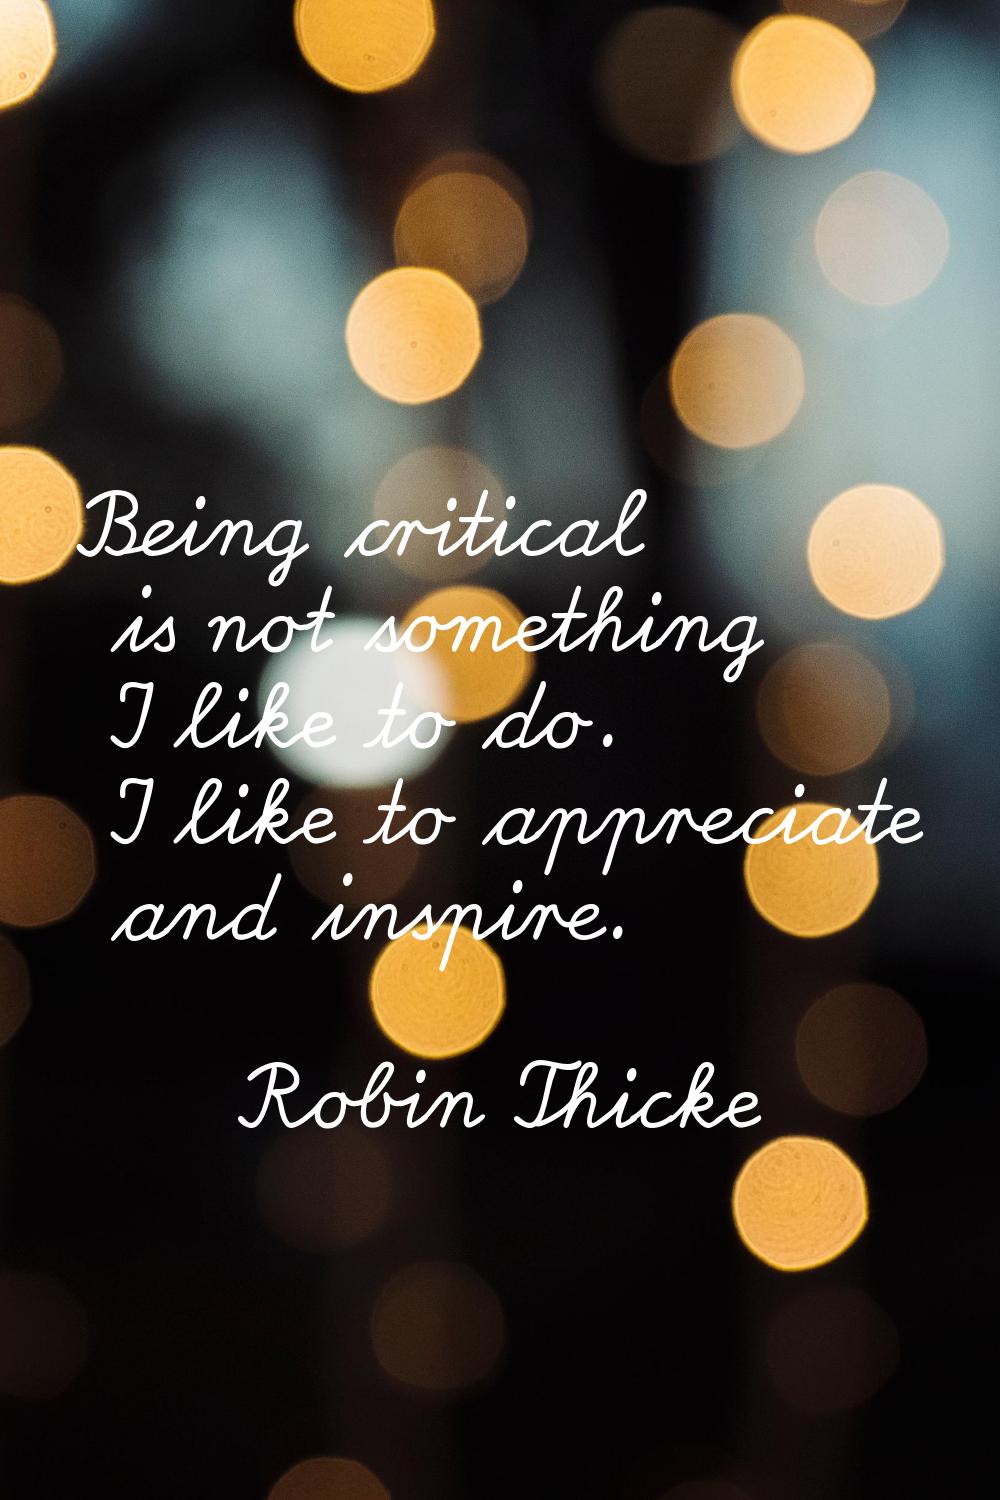 Being critical is not something I like to do. I like to appreciate and inspire.